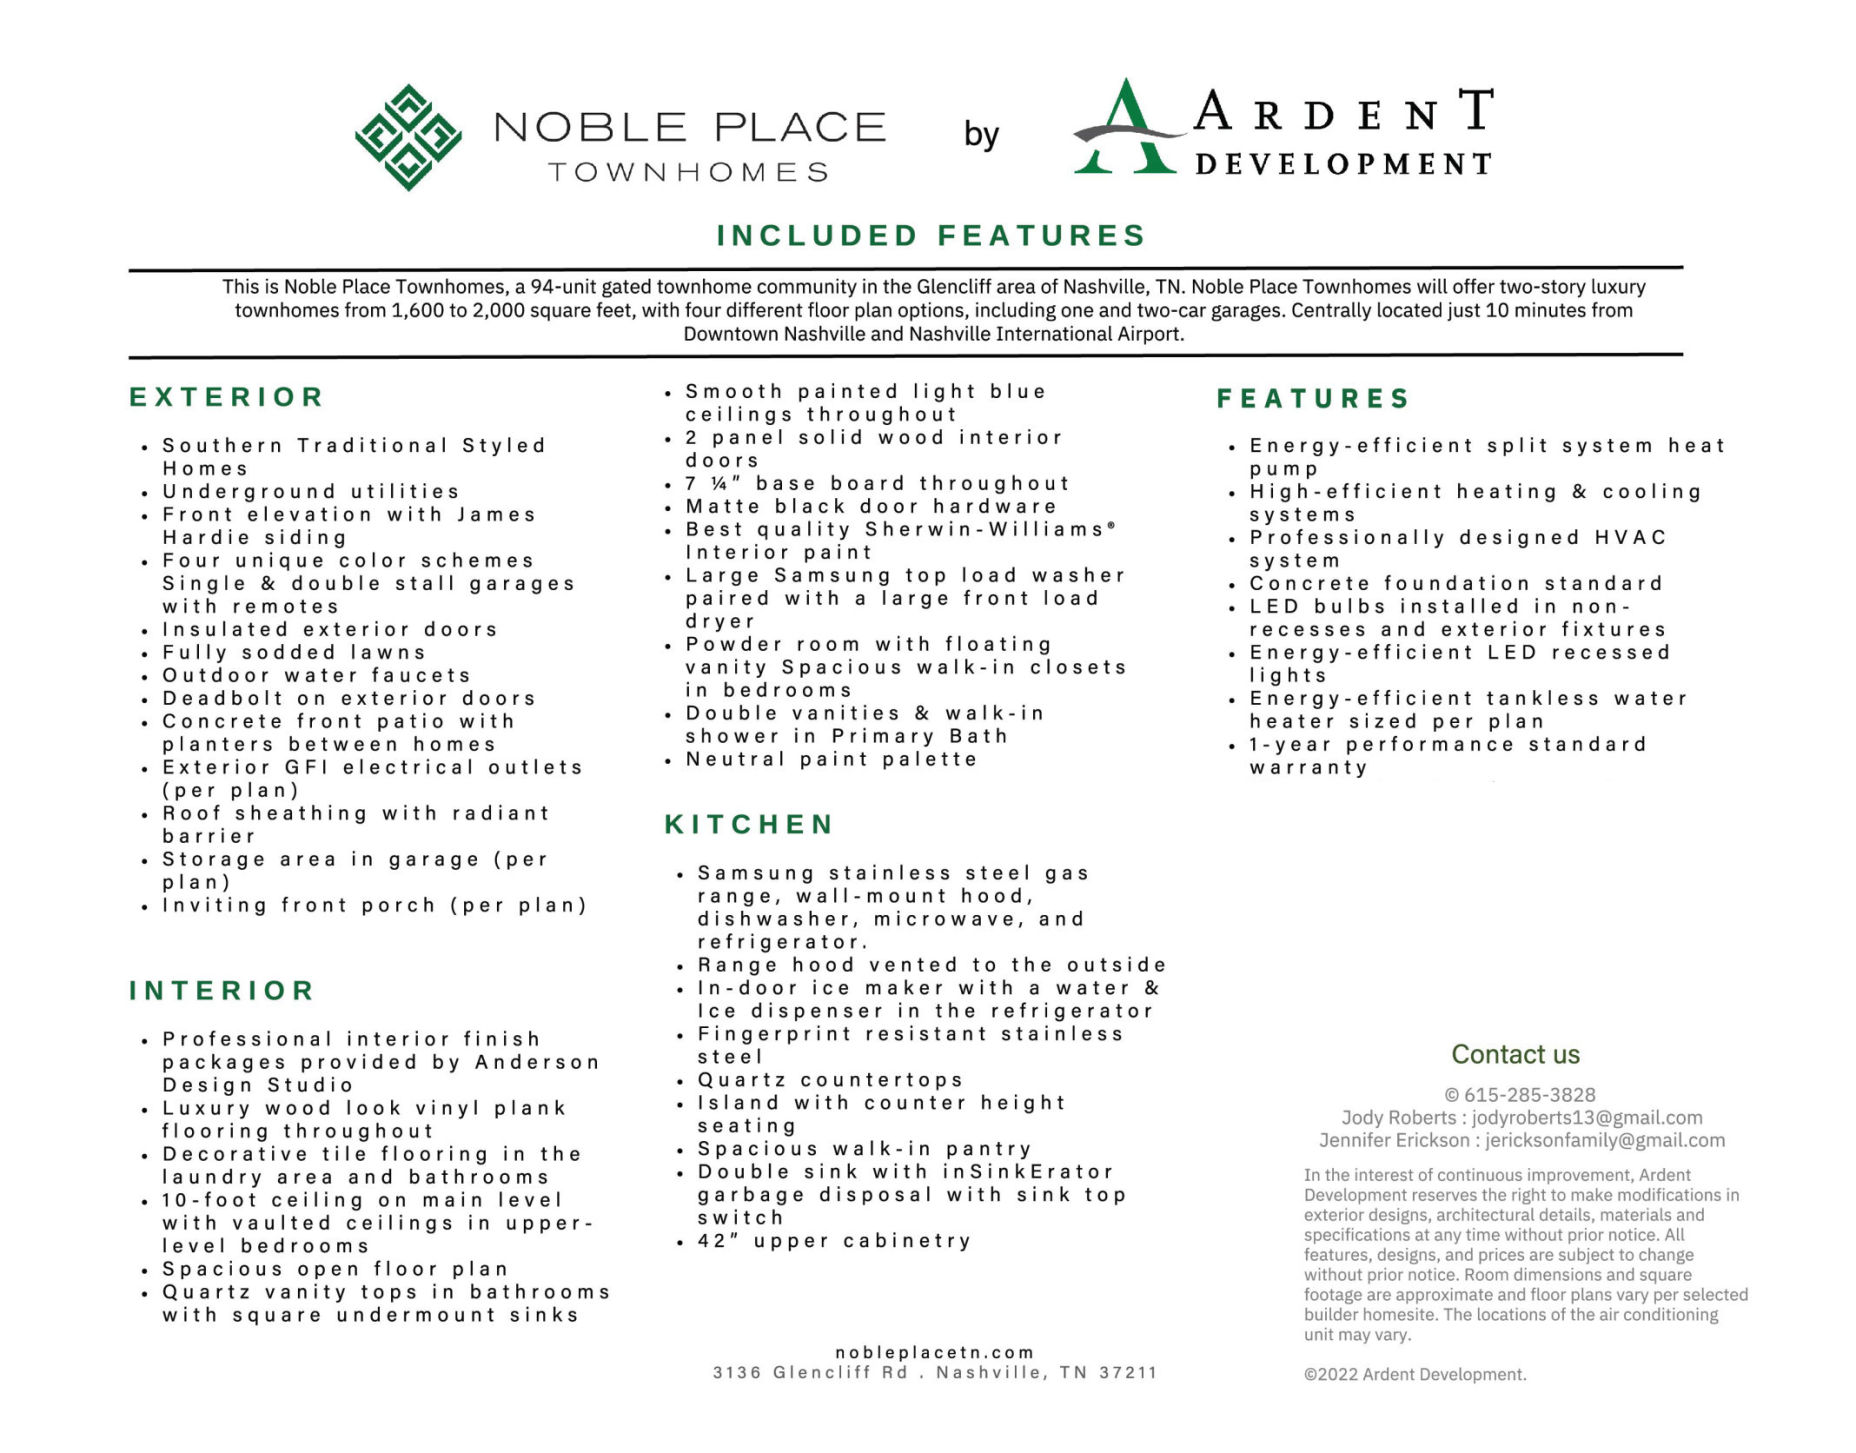 Noble Place Features